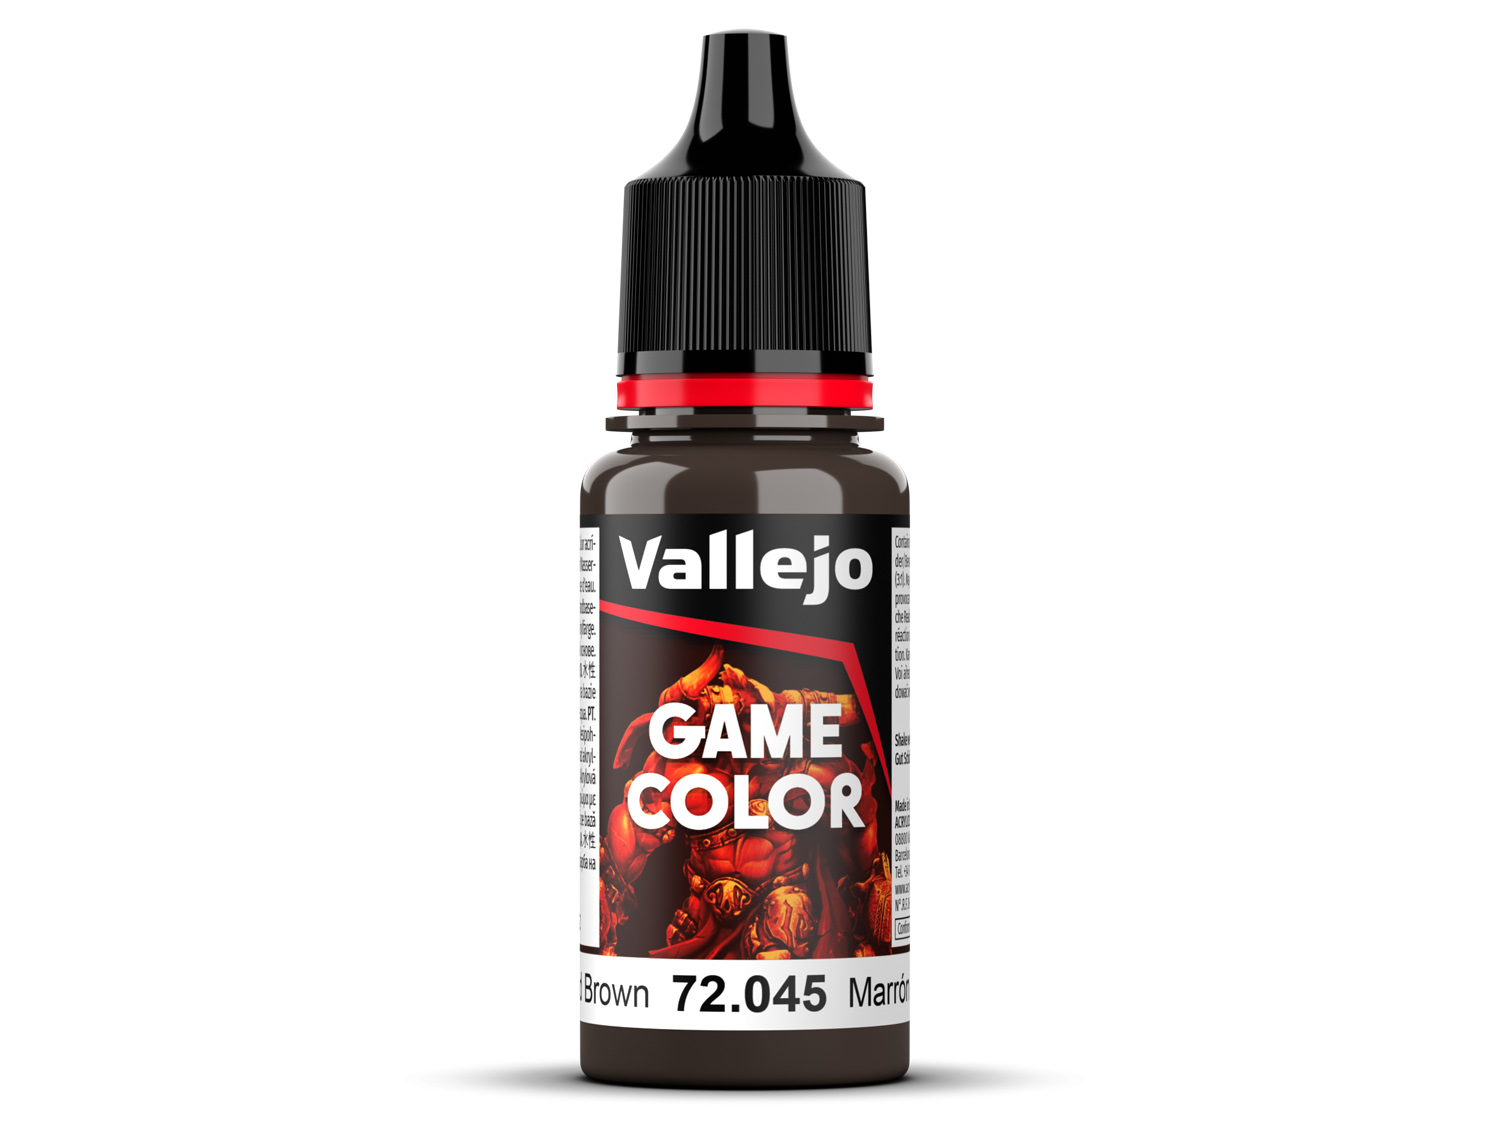 Vallejo Game Color 72045 Charred Brown 18 ml.